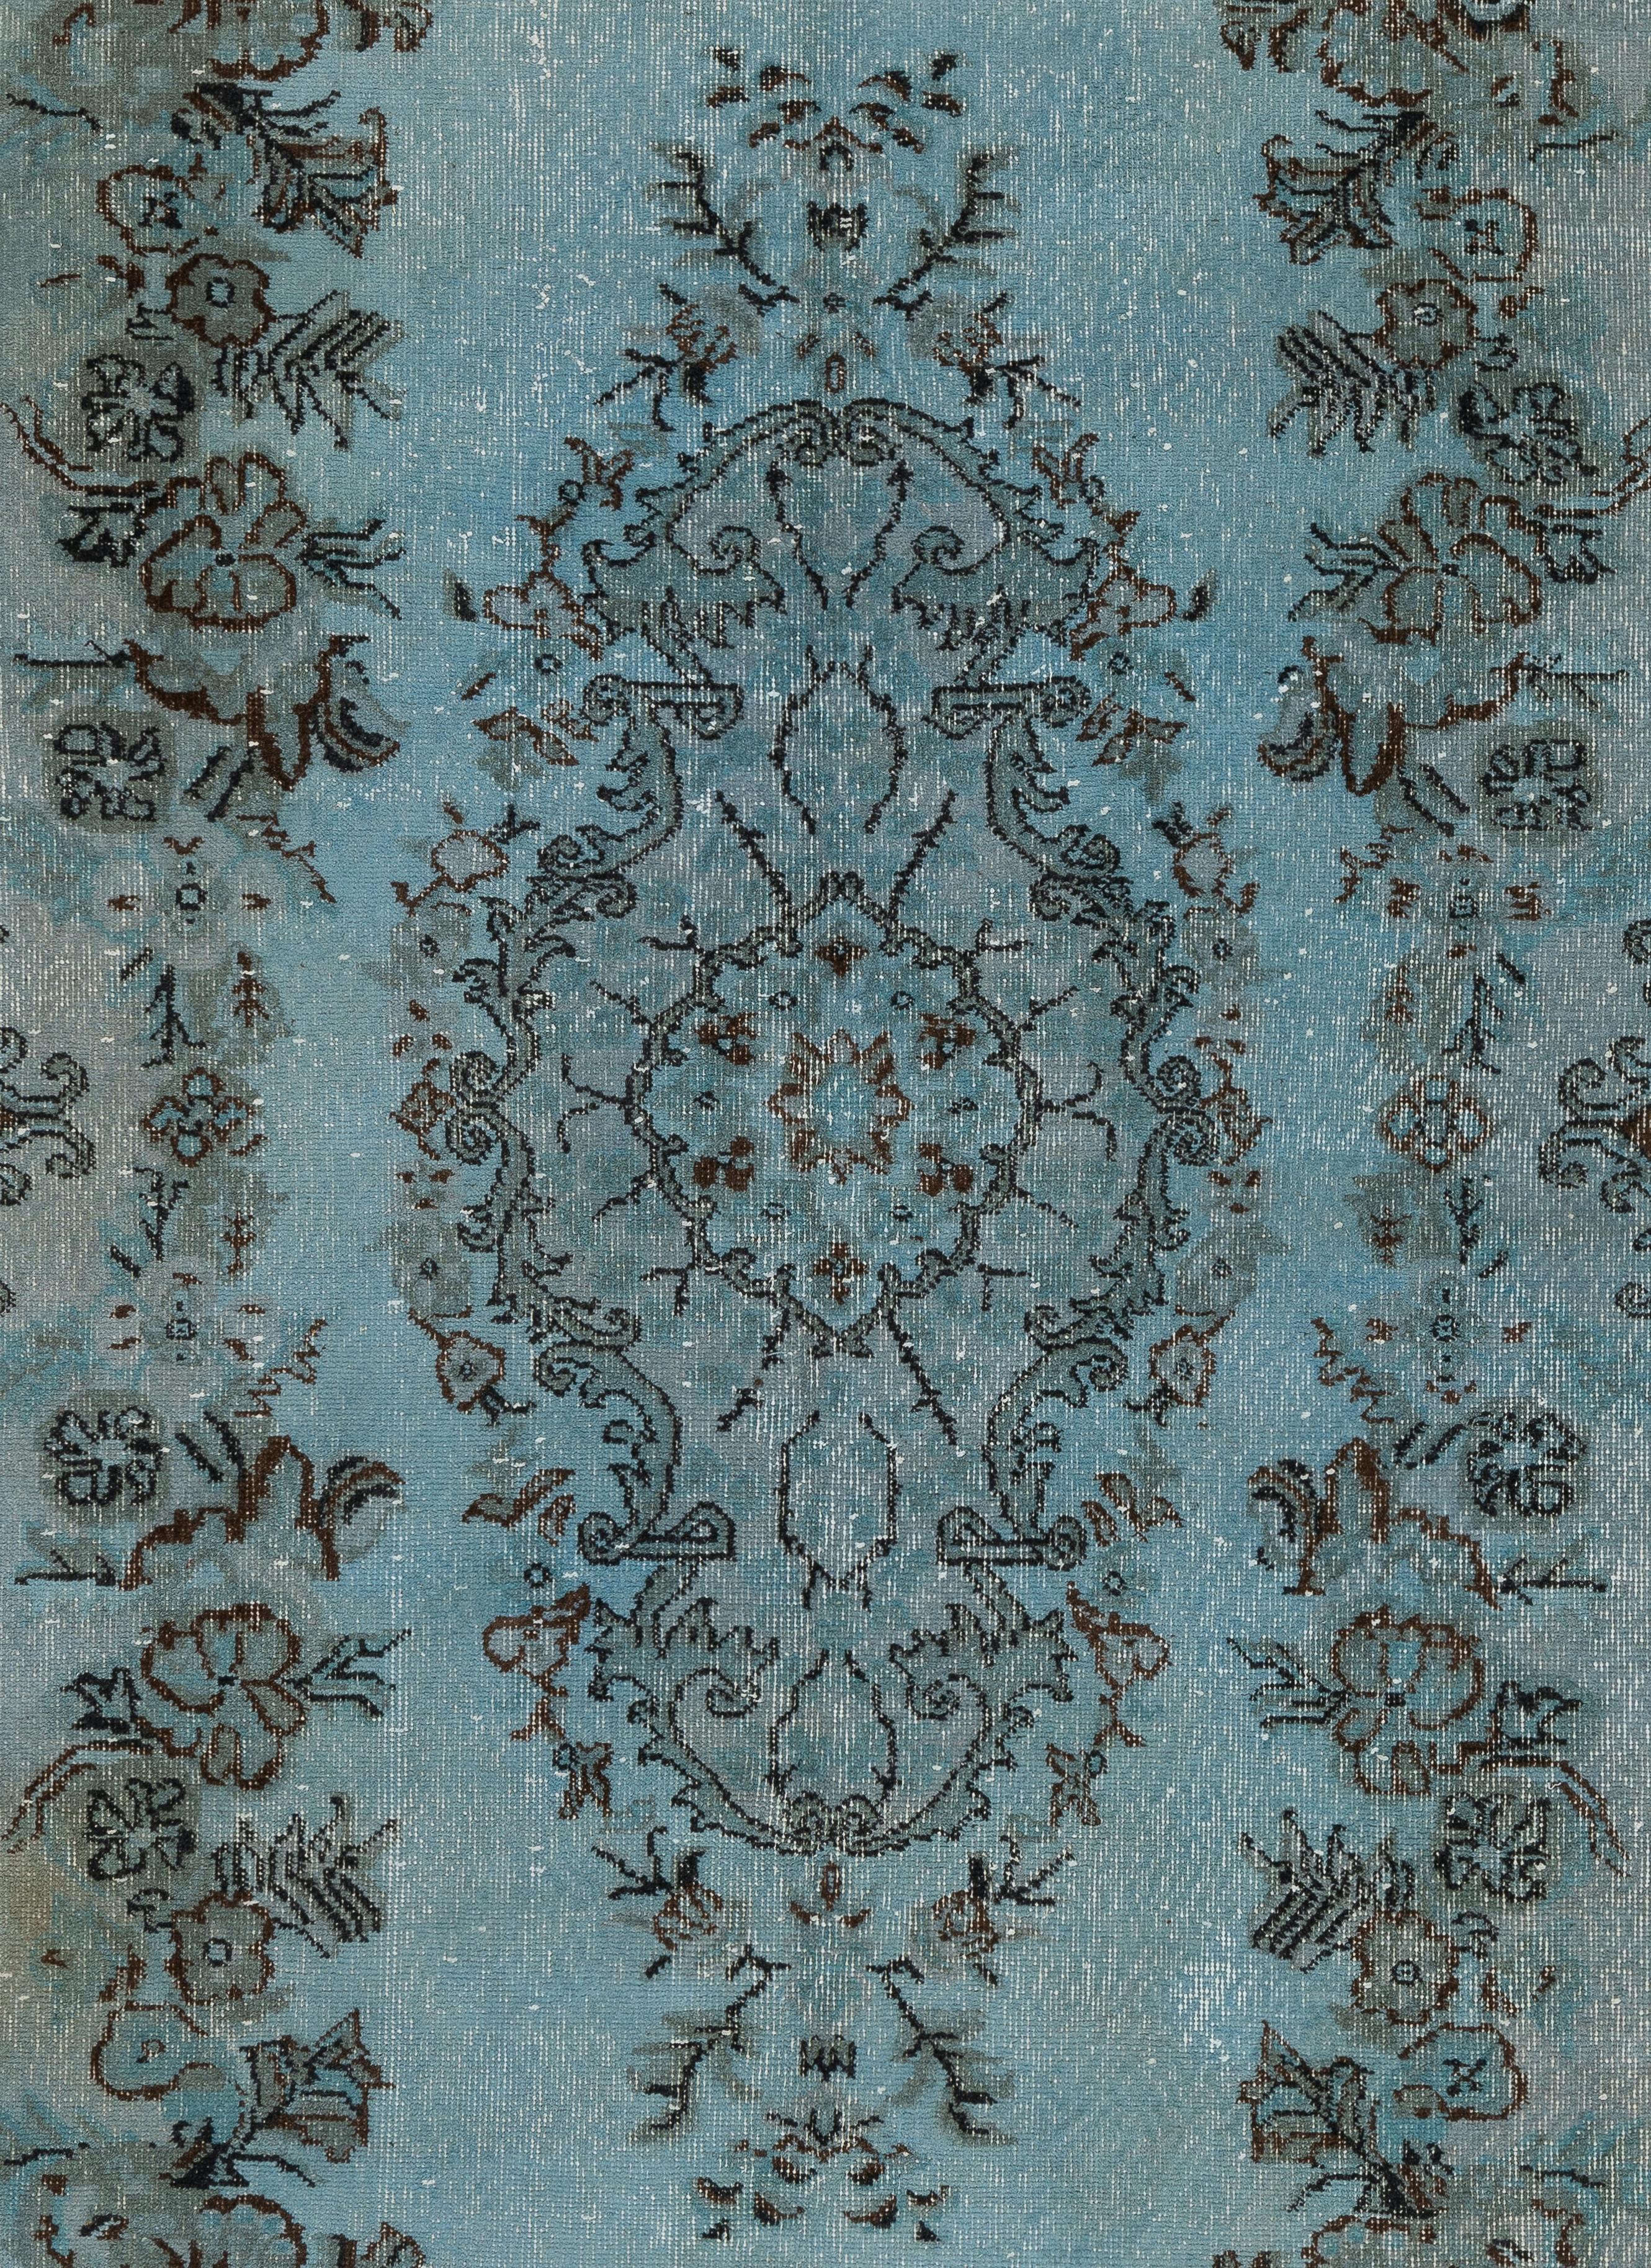 Hand-Knotted 6x9.2 Ft Handmade Turkish Rug in Denim Blue, Contemporary Baroque Design Carpet For Sale